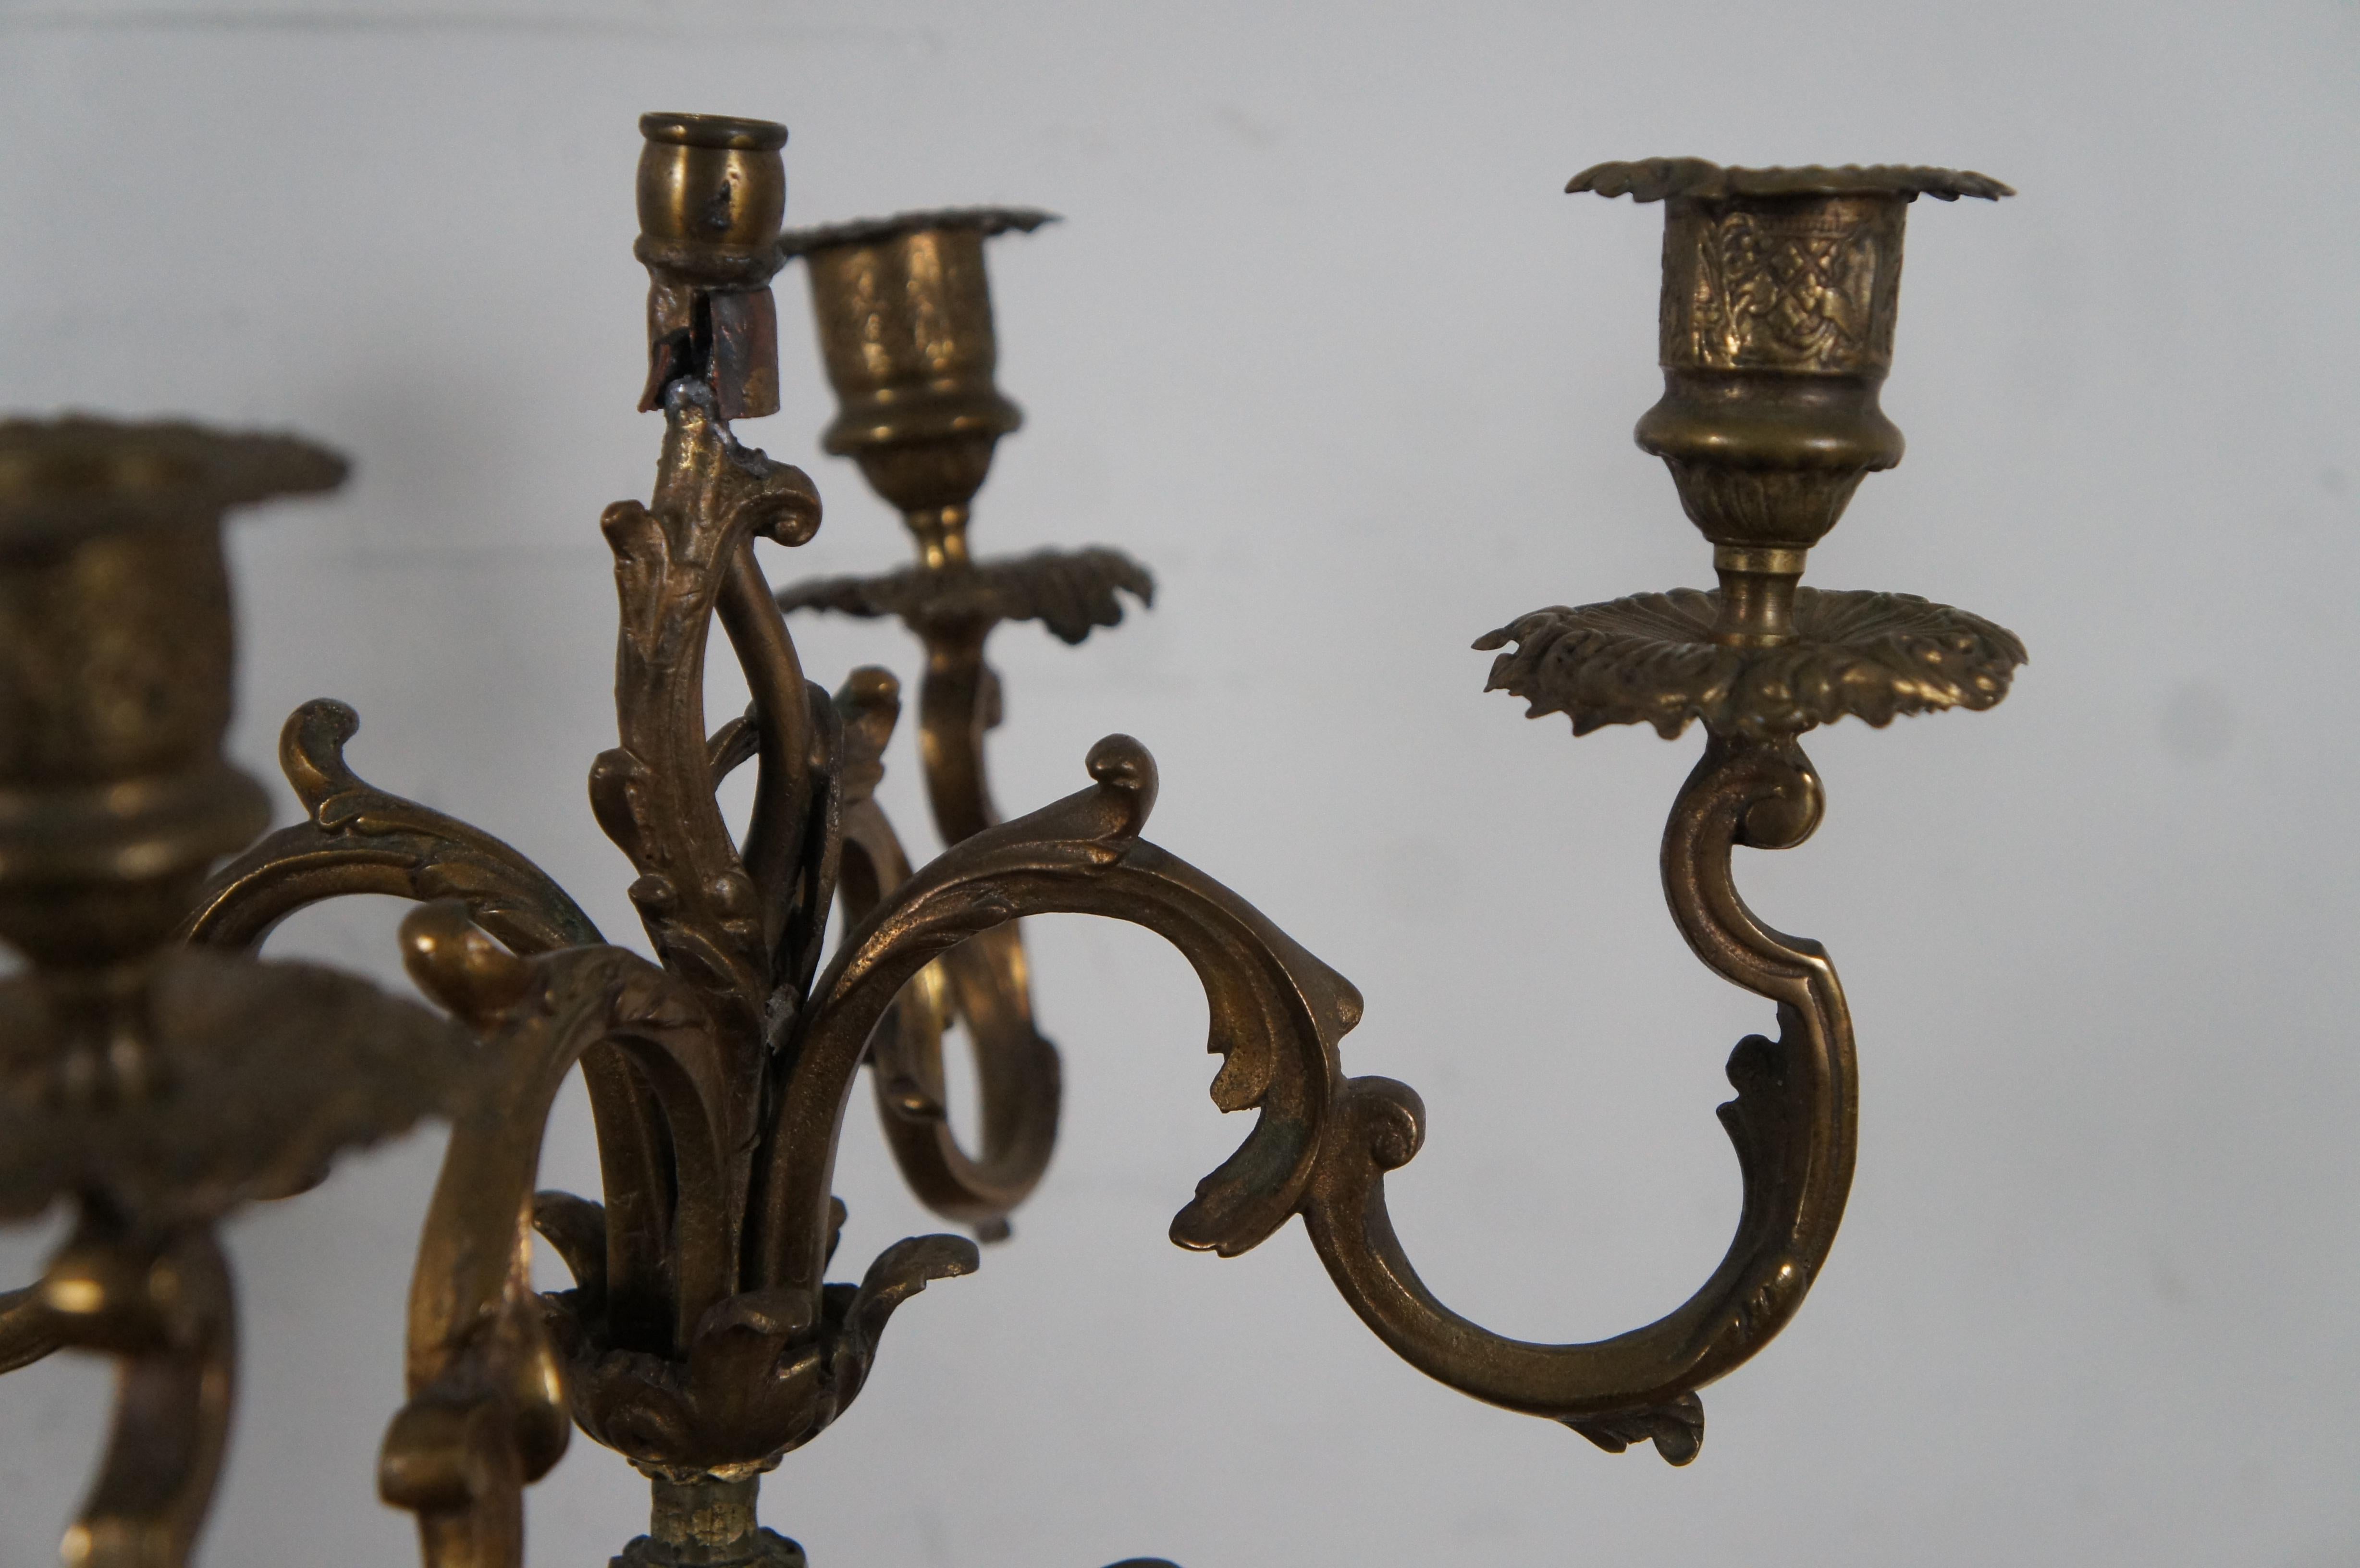 2 Antique Baroque 4 Arm Candelabras Candle Holders Converted Lamps 20